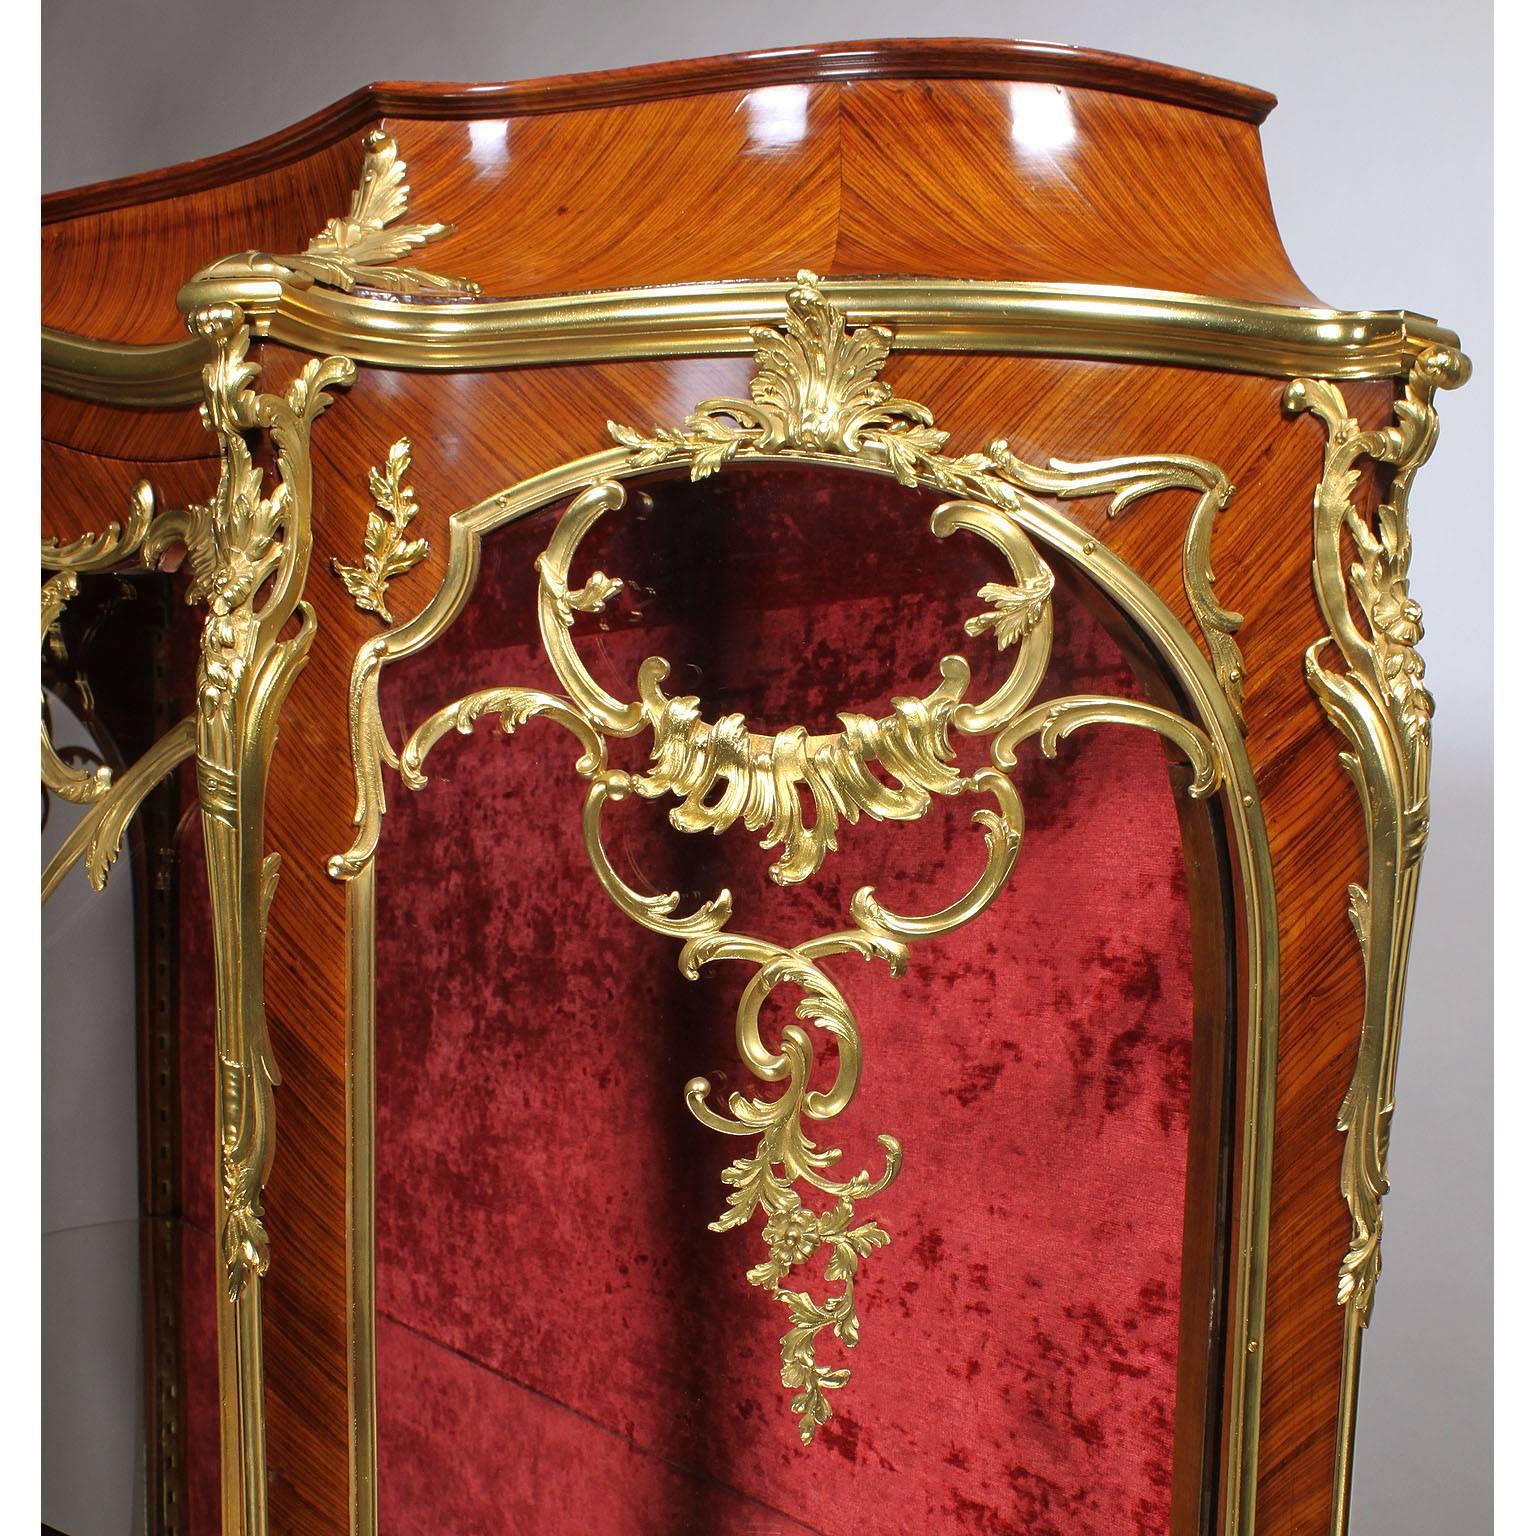 French 19th-20th Century Louis XV Style Kingwood and Ormolu Mounted Vitrine For Sale 1